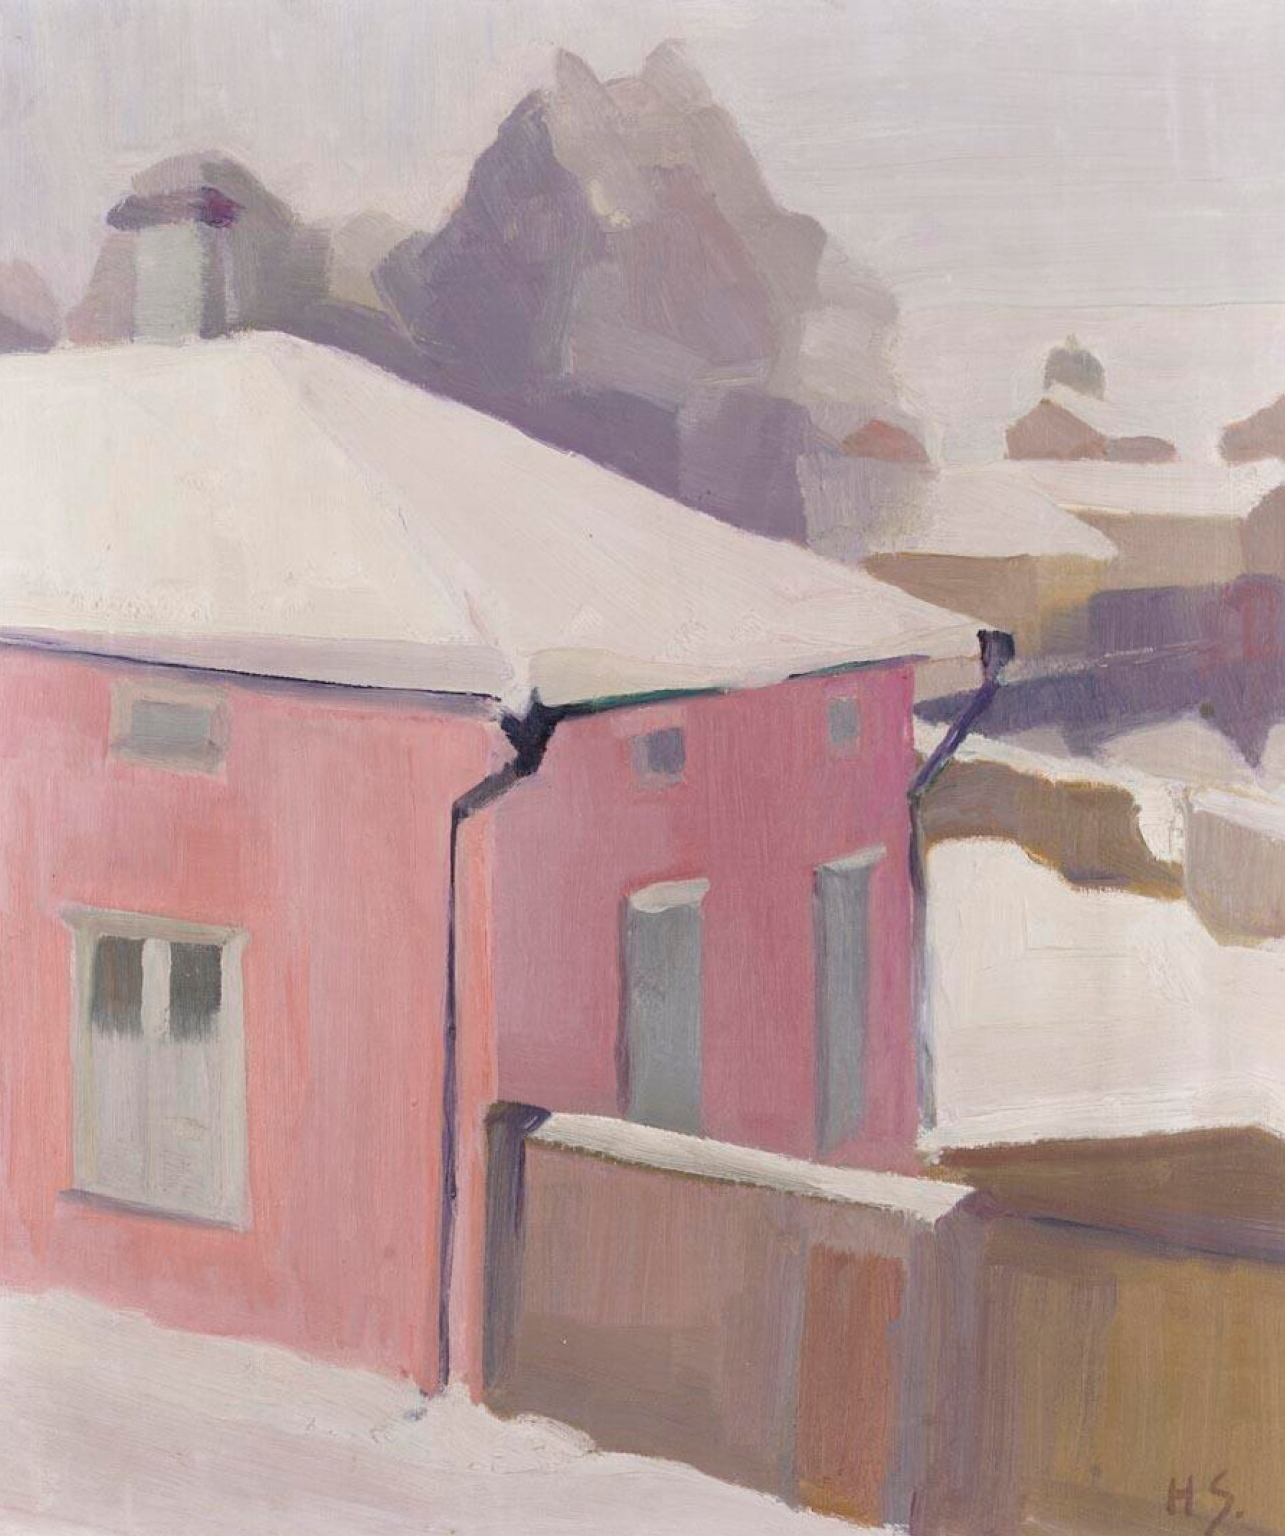 Vue d'une cour à Tammisaari by Helene Schjerfbeck - 1919–1920 - 42,5 x 36,5 cm collection privée